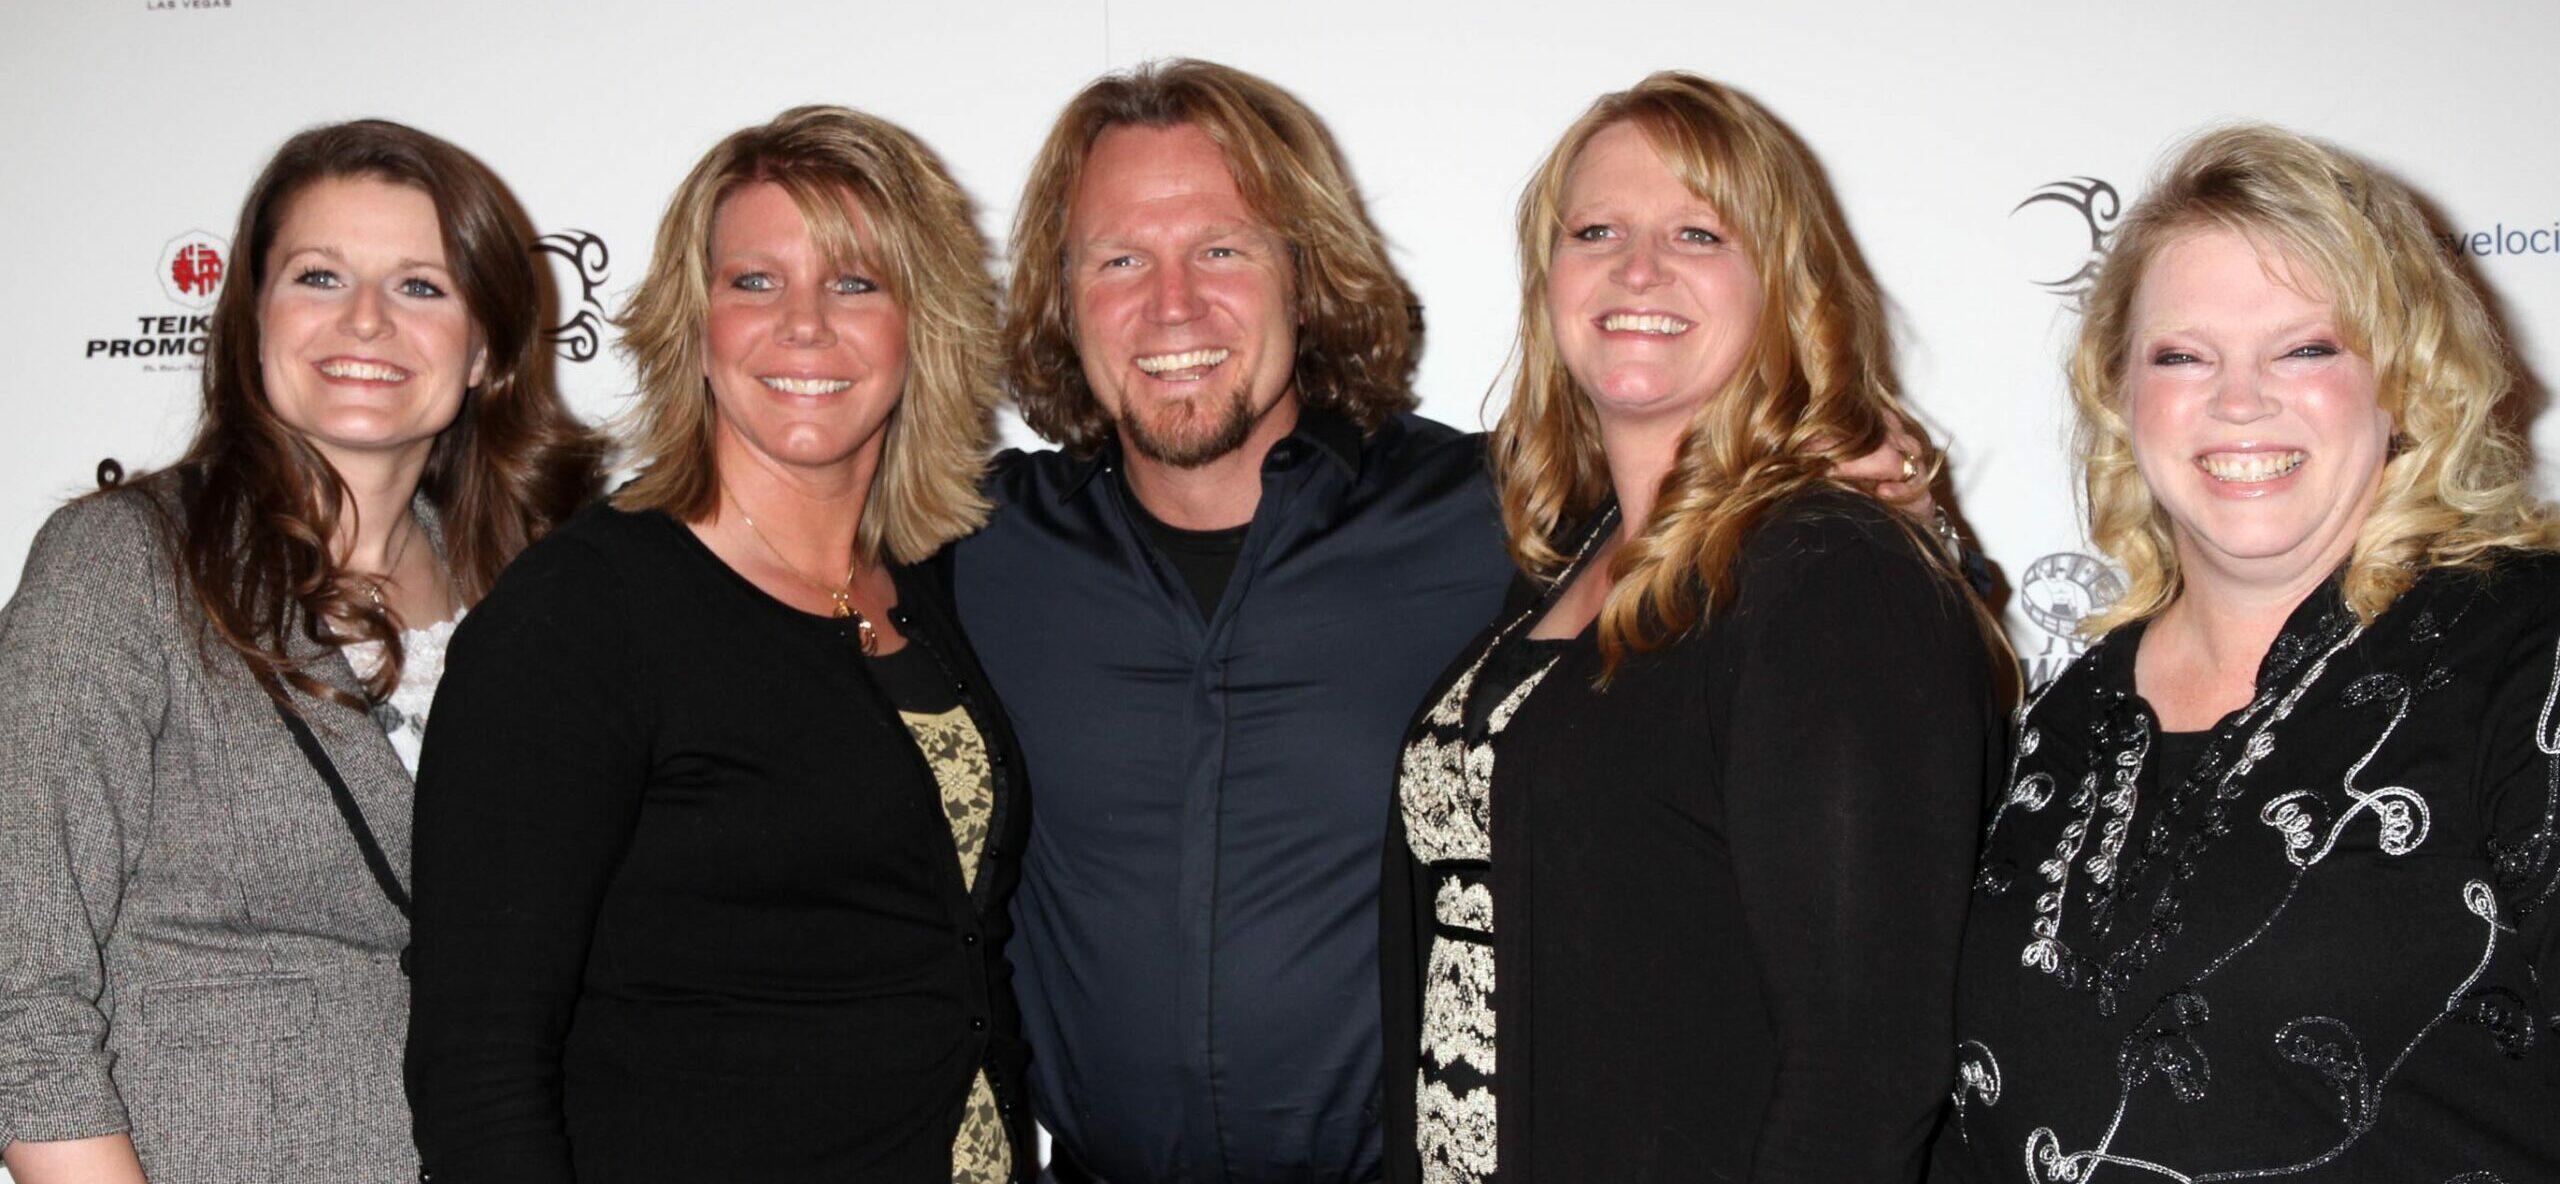 Sister Wives cast smiling